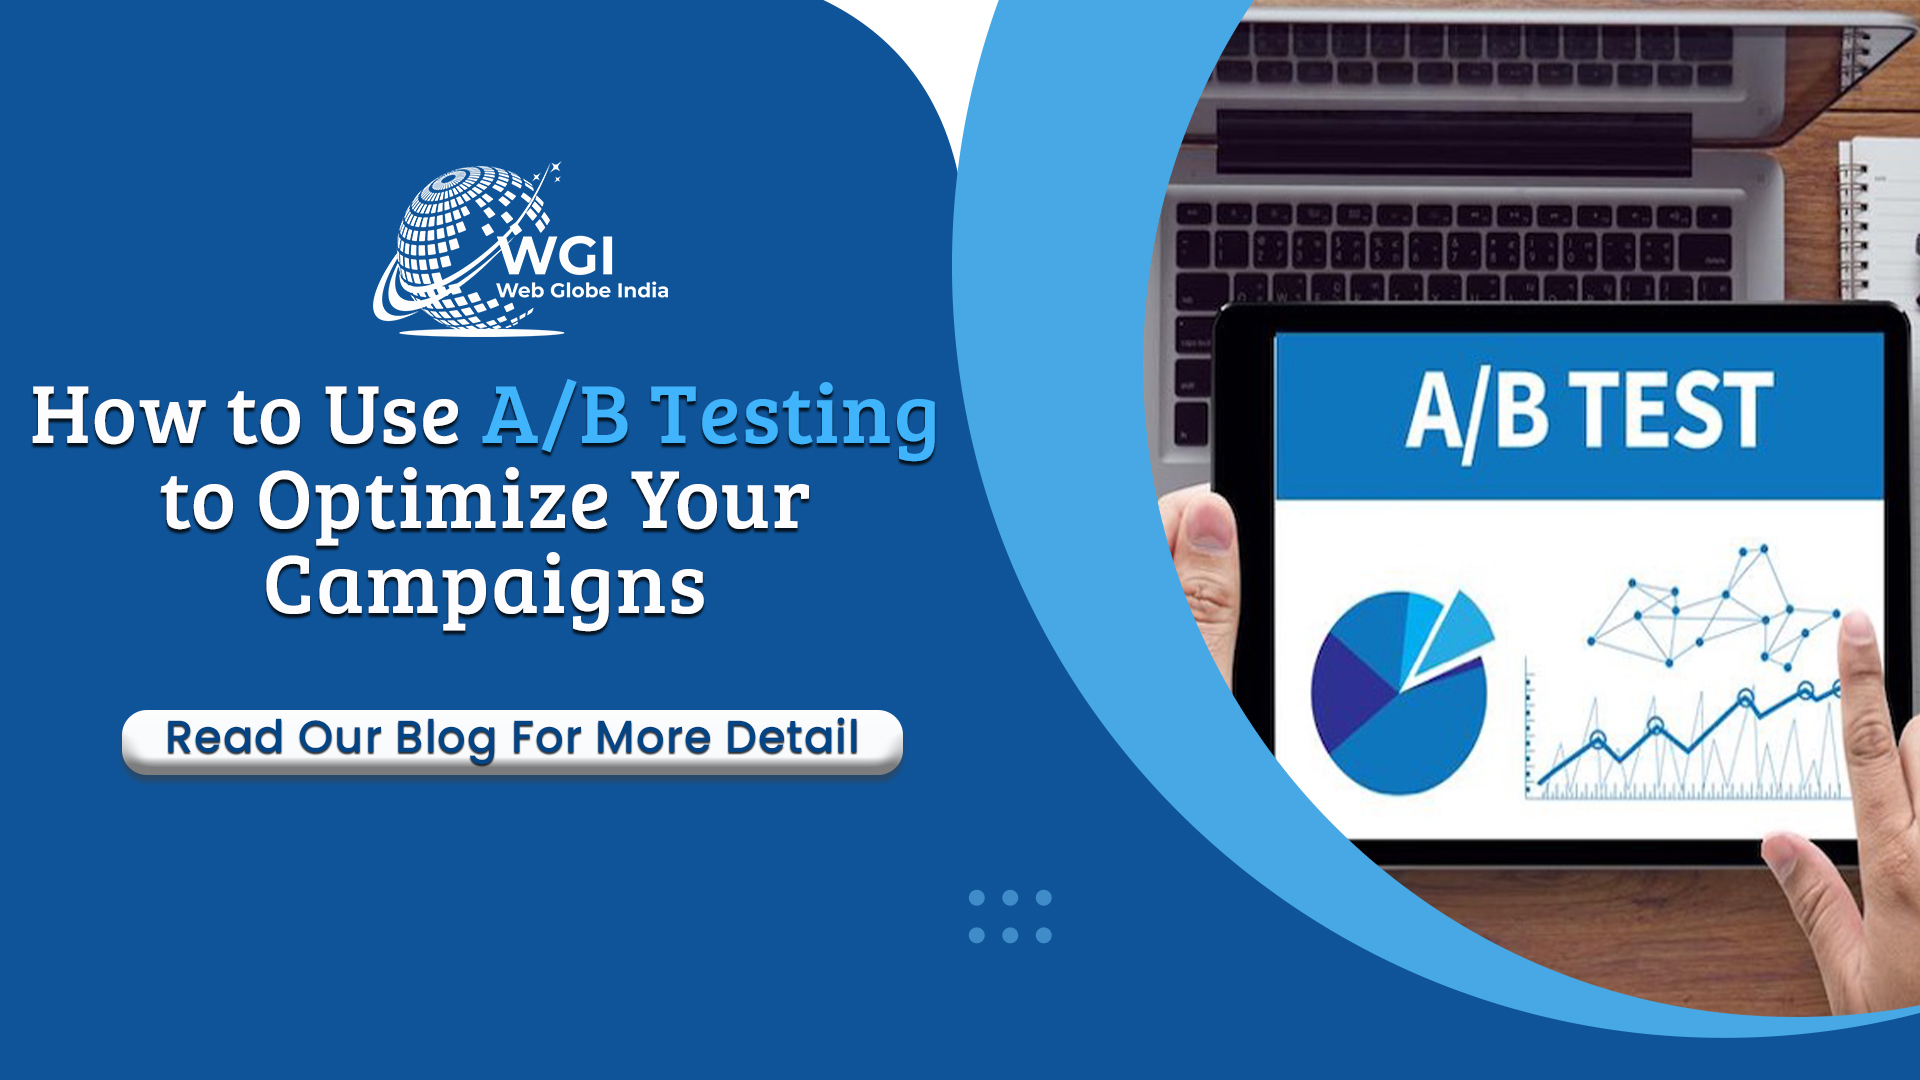 How to Use A/B Testing to Optimize your Campaigns